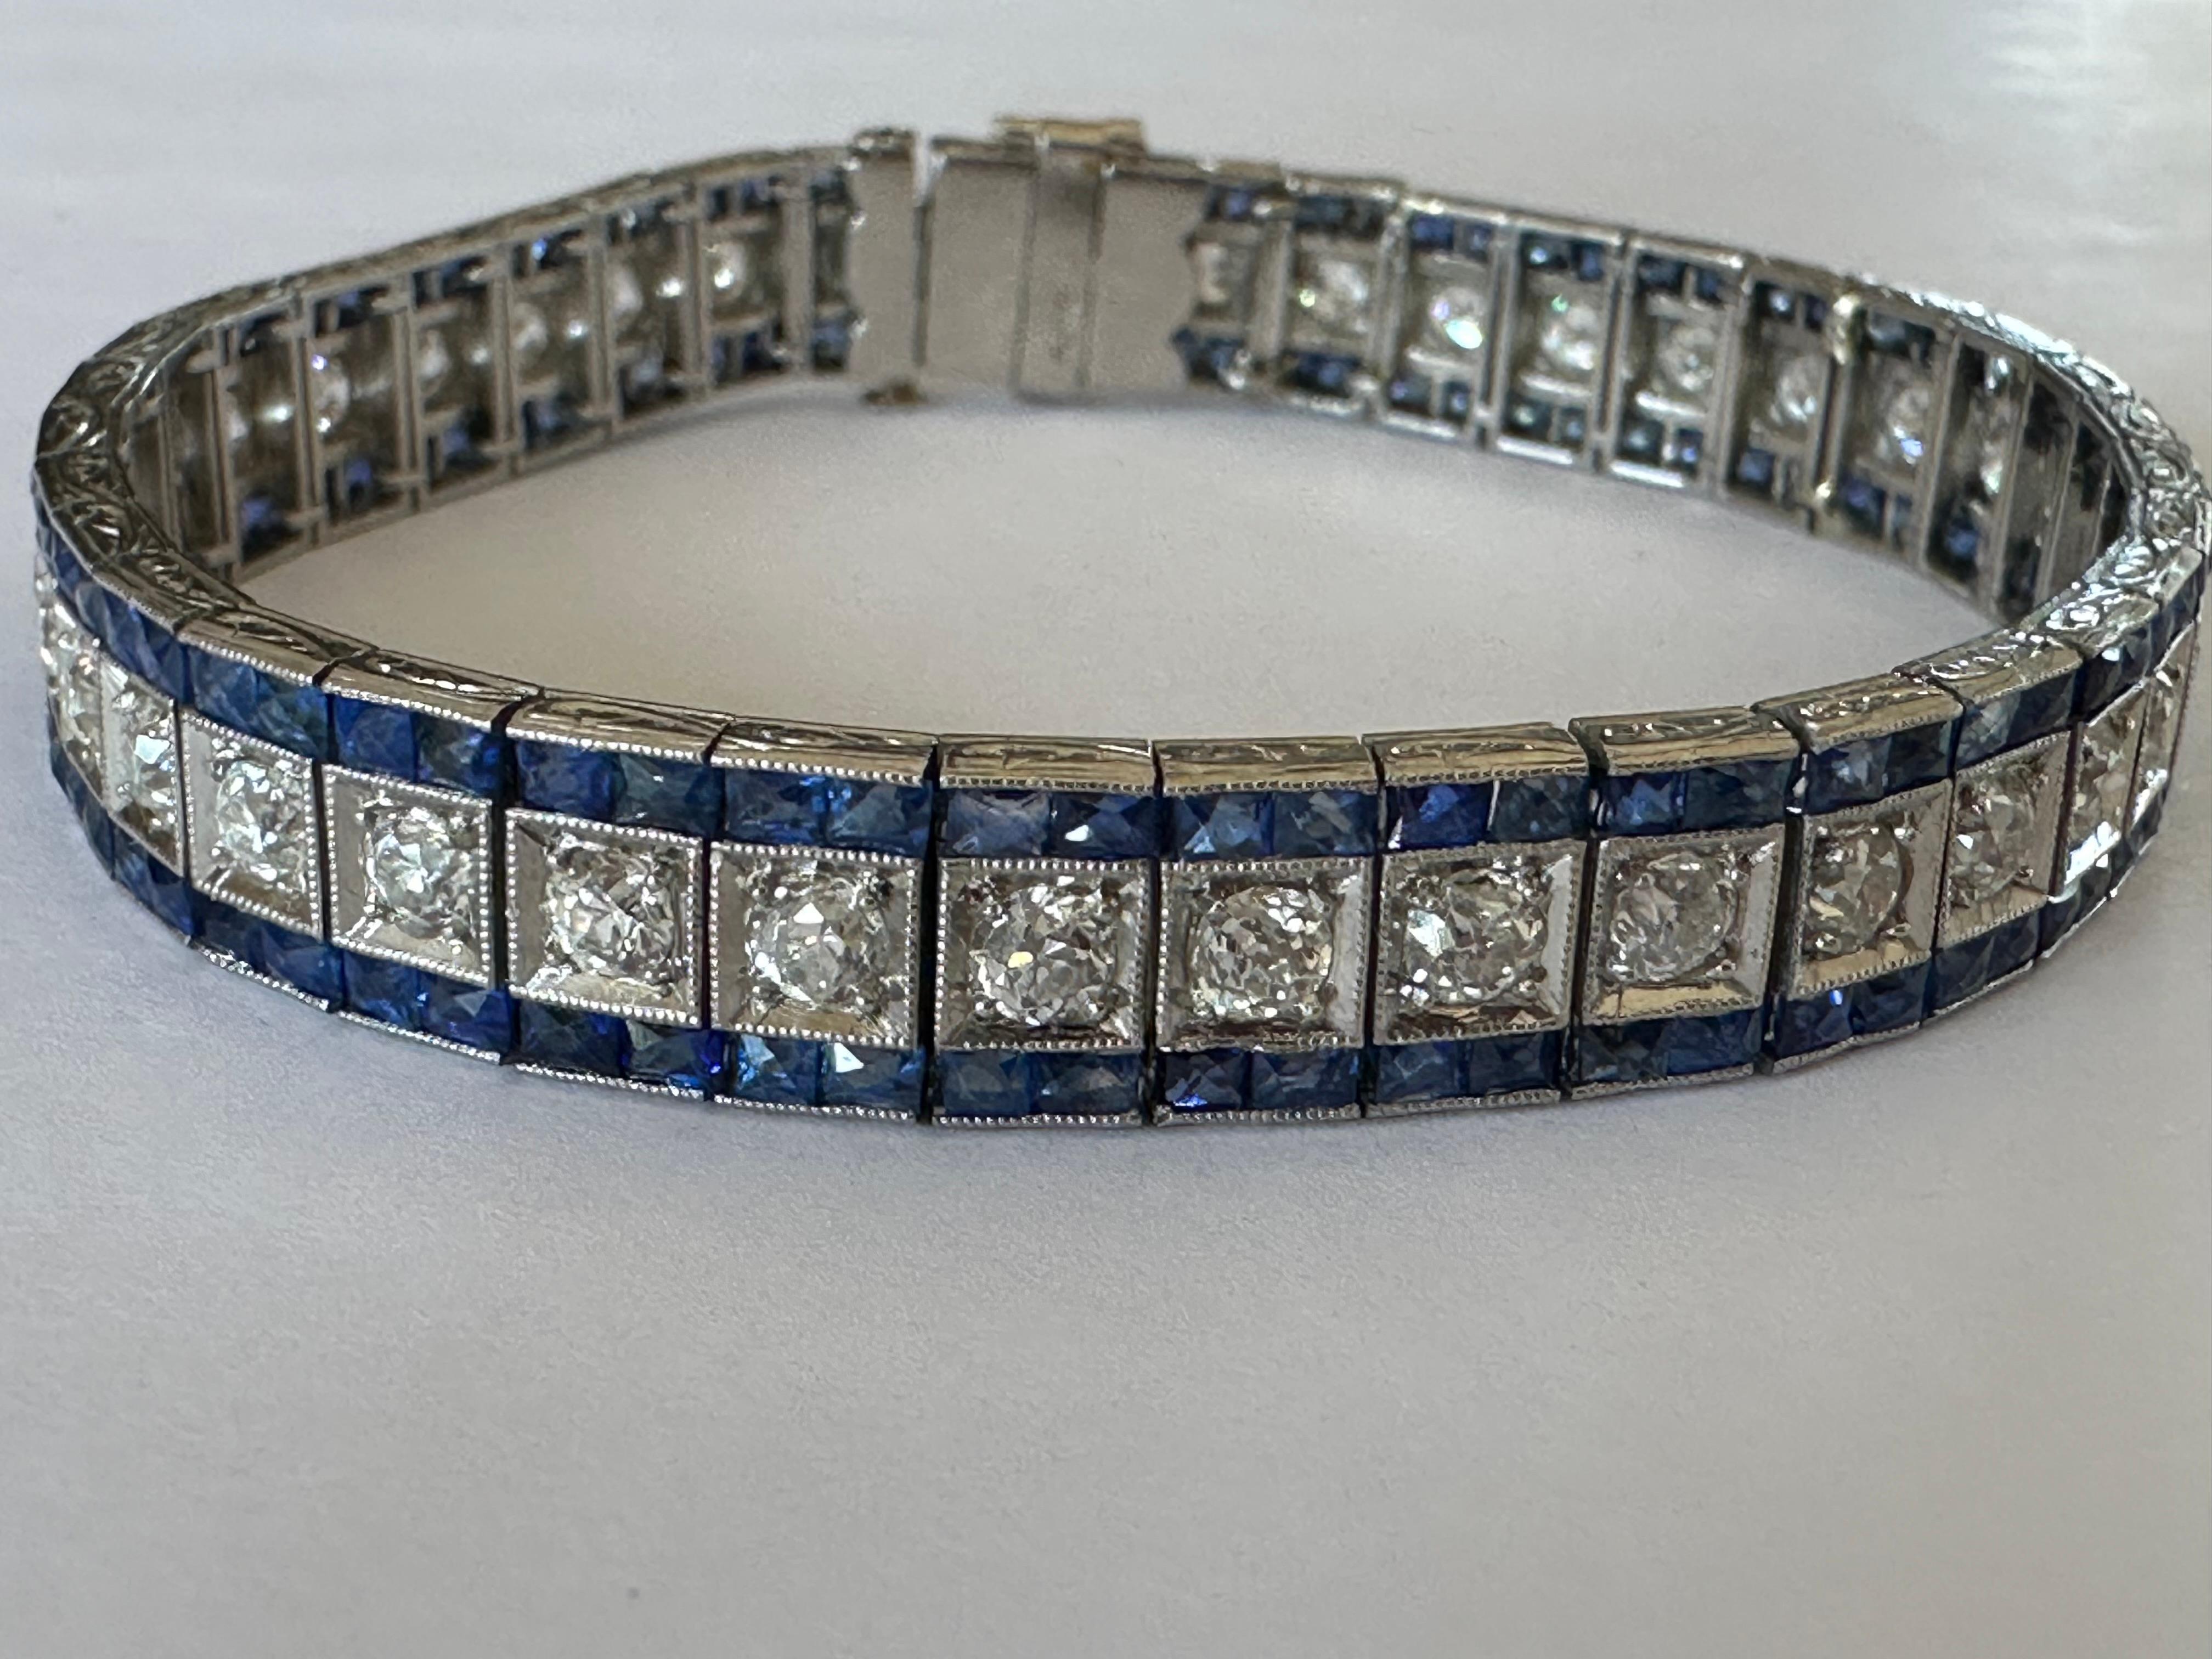 Crafted in 1930, this timeless and elegant Art Deco bracelet features a straight line of thirty-nine sparkling Old European-cut diamonds, GH color, VS-SI clarity, totaling approximately 6.5 carats and framed on the top and bottom by two rows of